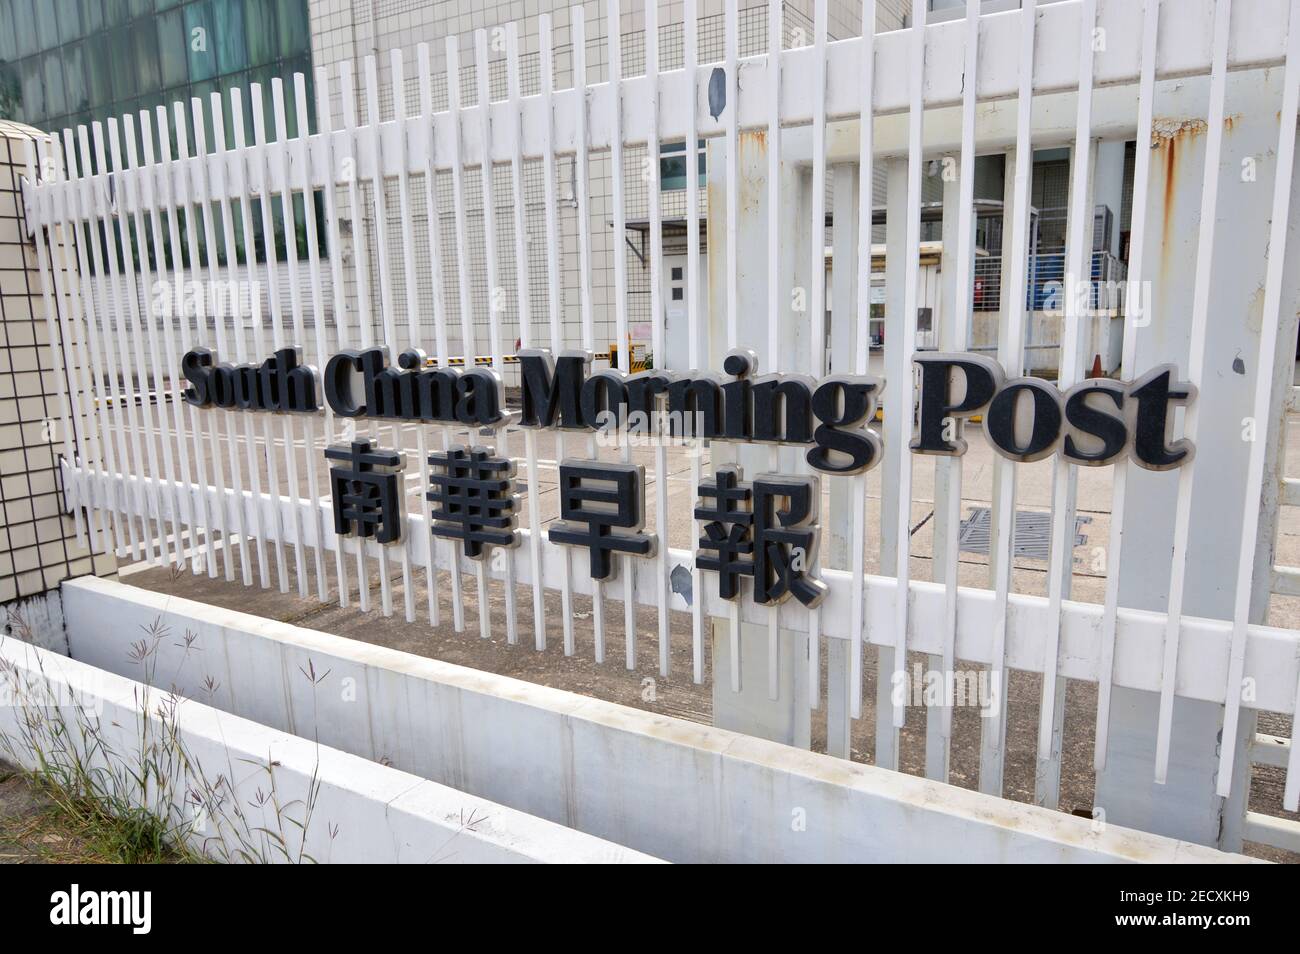 SCMP (南華早報) signage at headquarters of South China Morning Post Publishers Limited, Tai Po Industrial Estate (大埔工業邨), Hong Kong Stock Photo